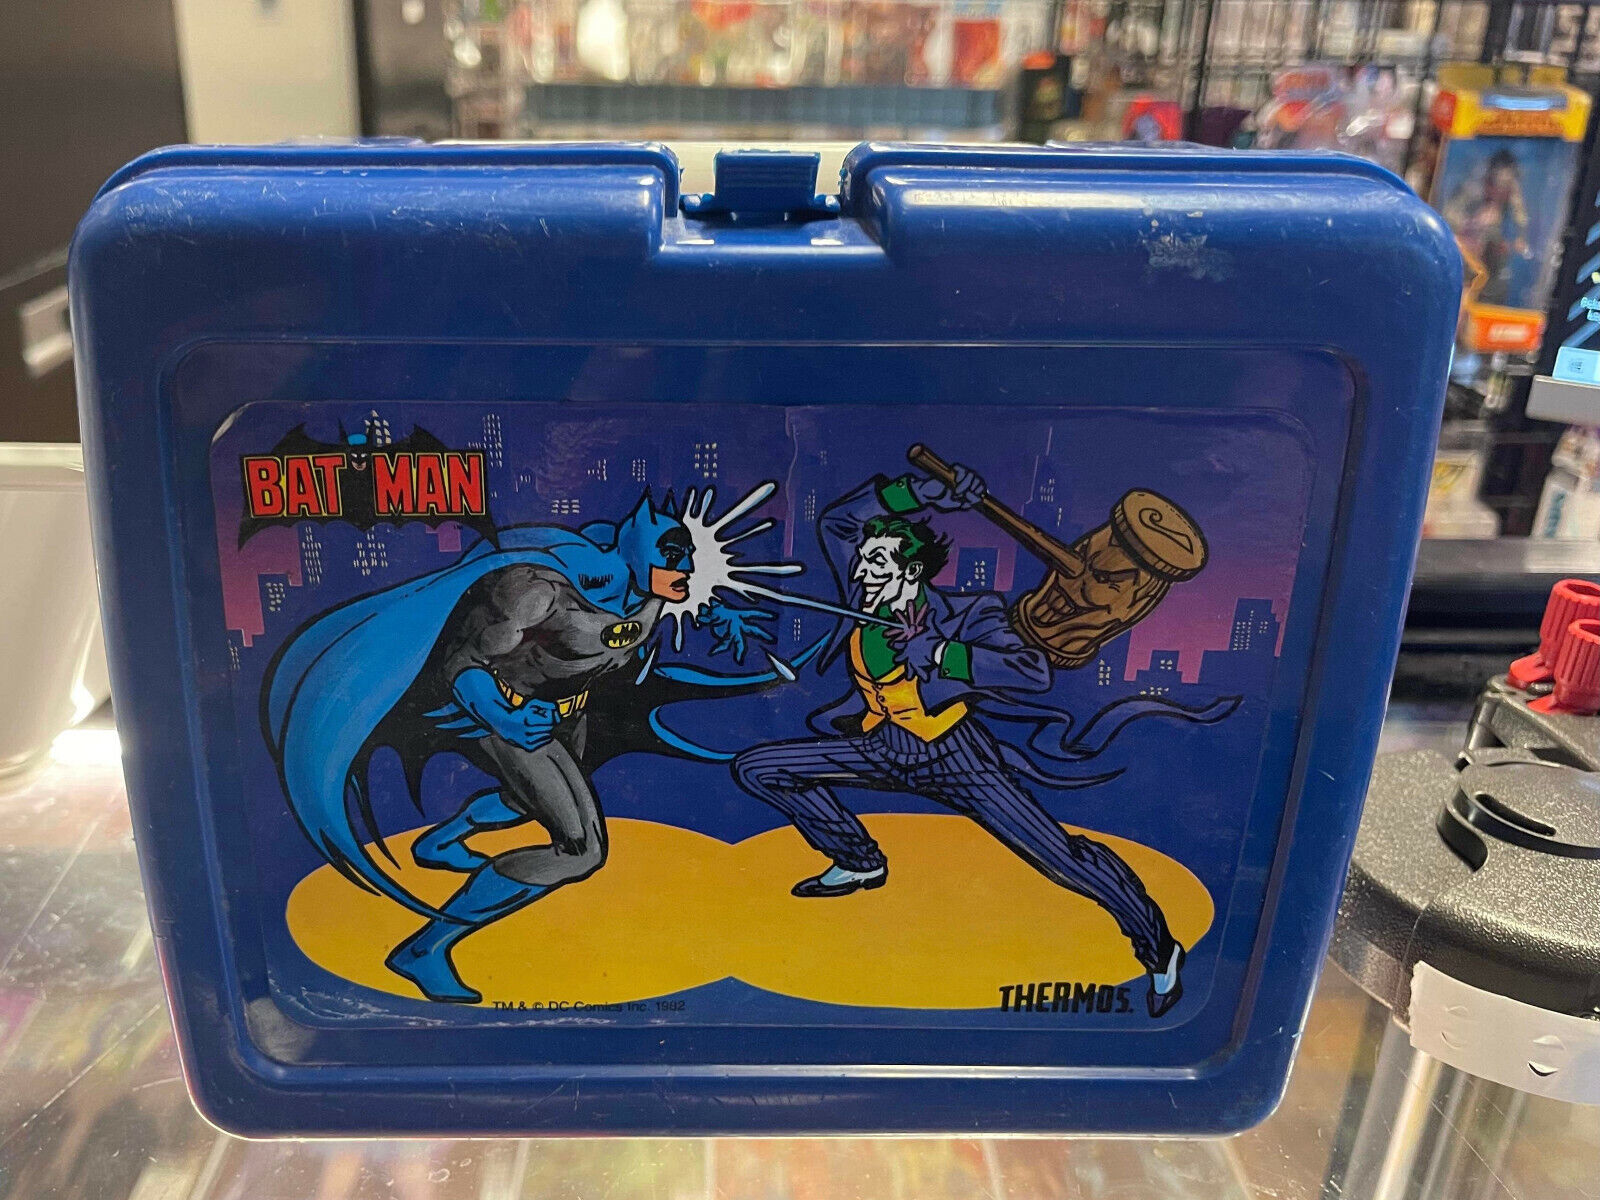 Vintage 1982 Batman and Joker Thermos Lunchbox and Thermis Bottle